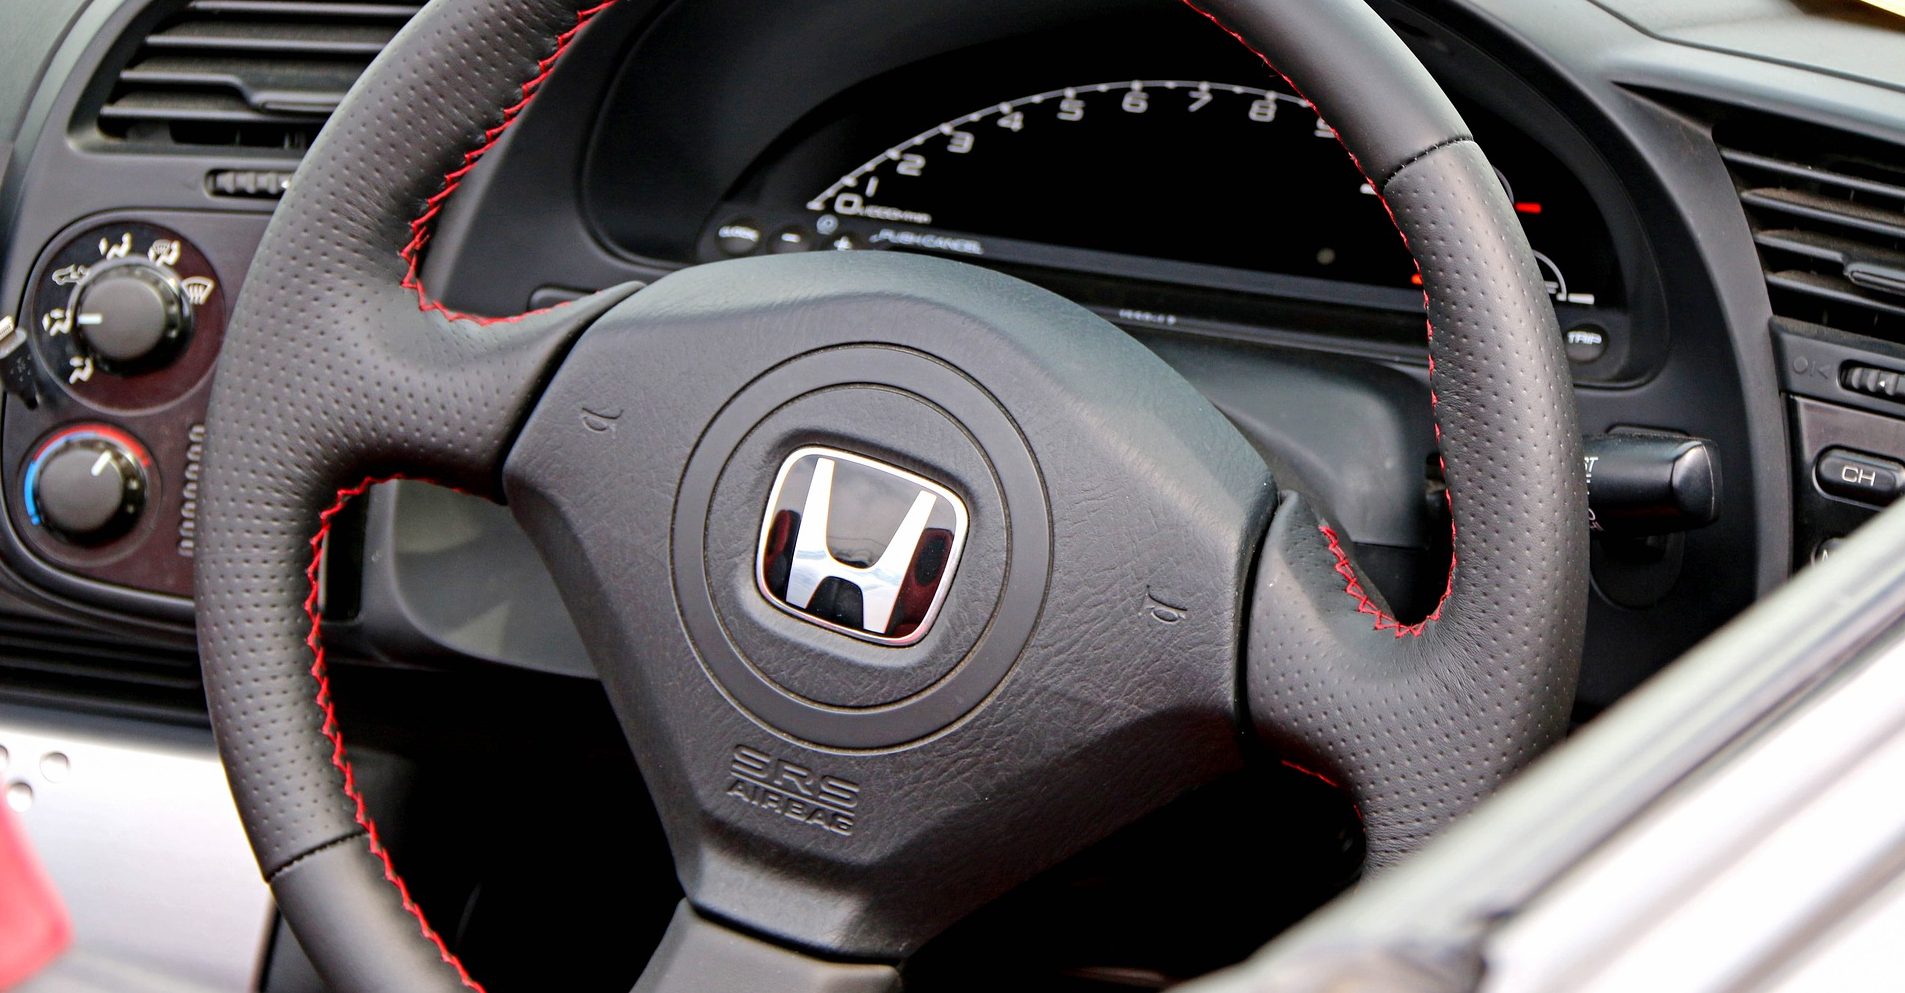 PROFECO alerts of failures in two models of the Honda brand